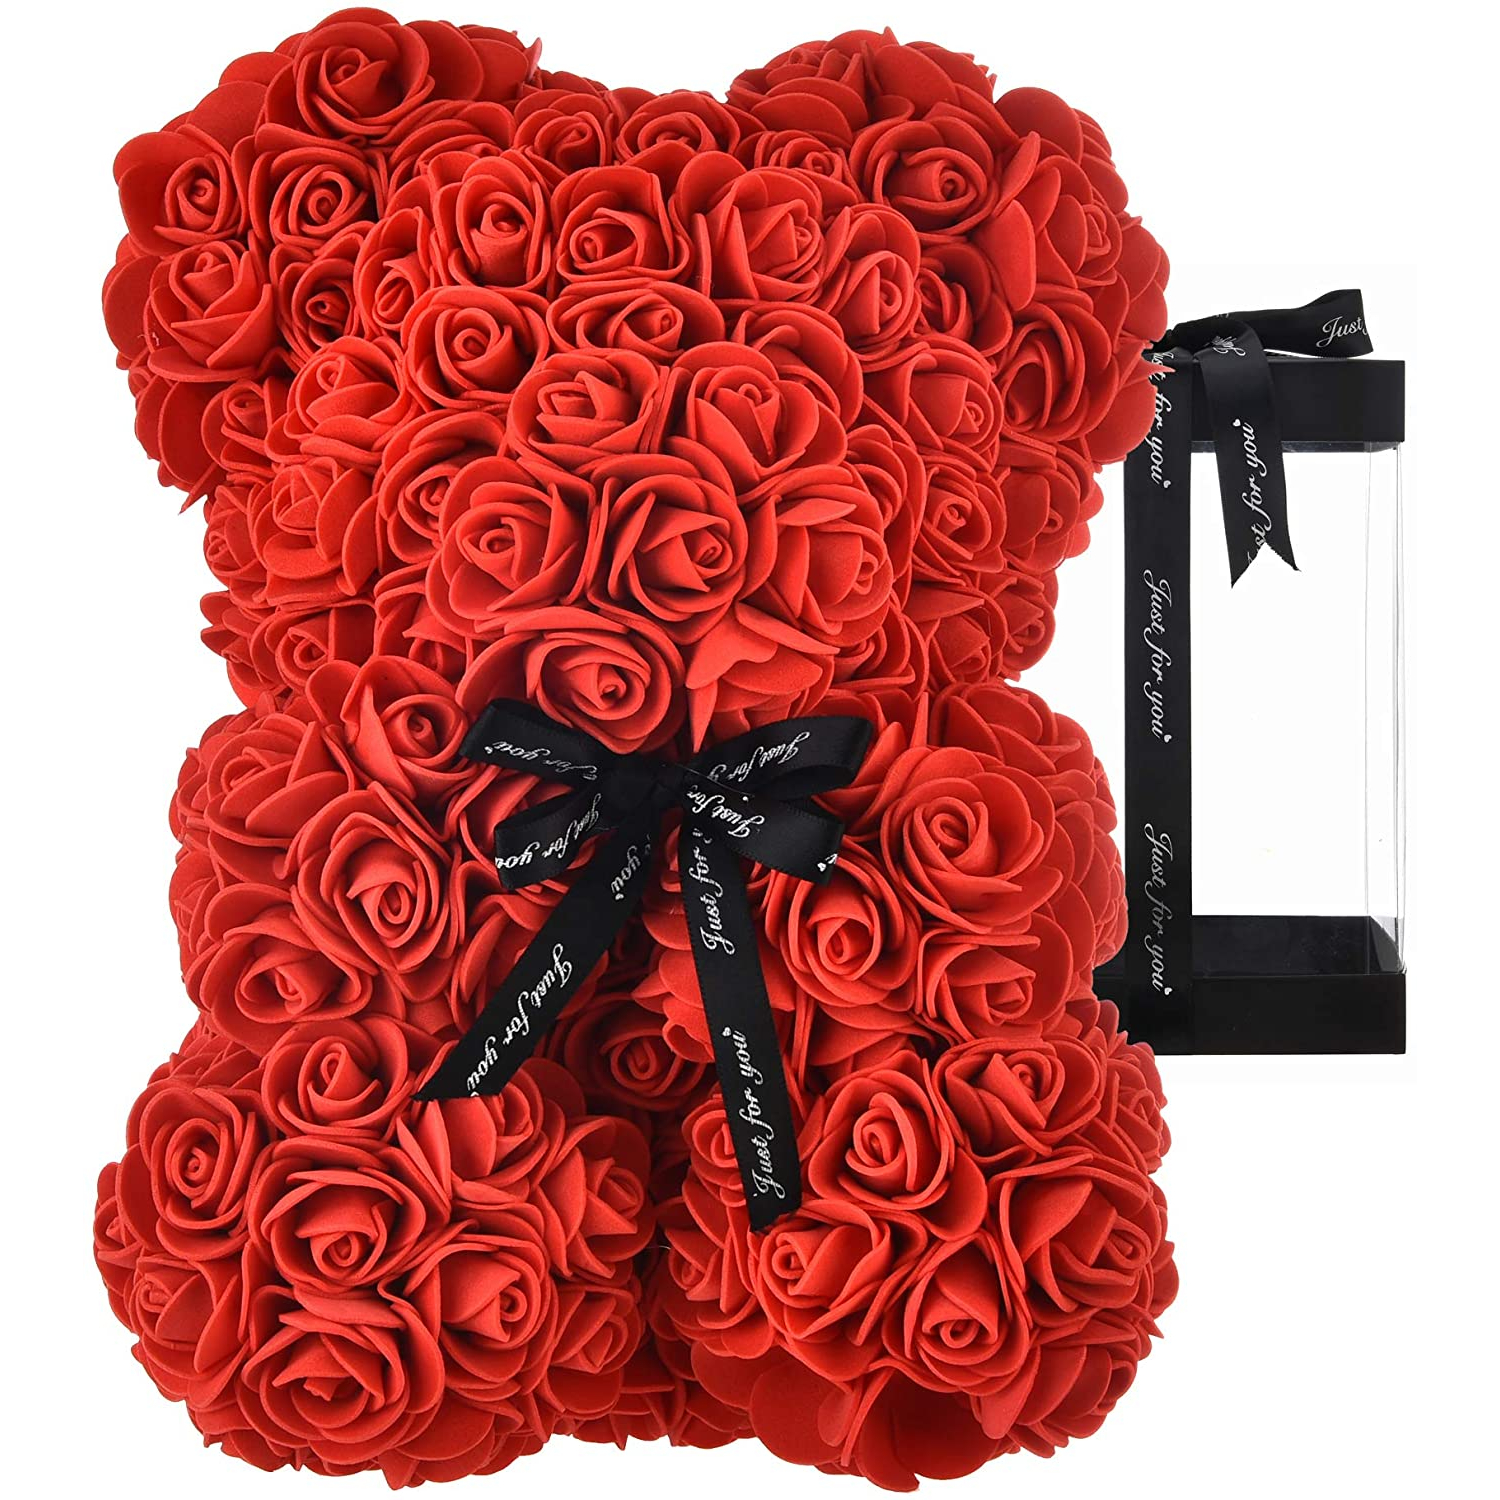 Romantic Valentines Love Items Novelty Gift Propose Teddy Ring Box Rose ML